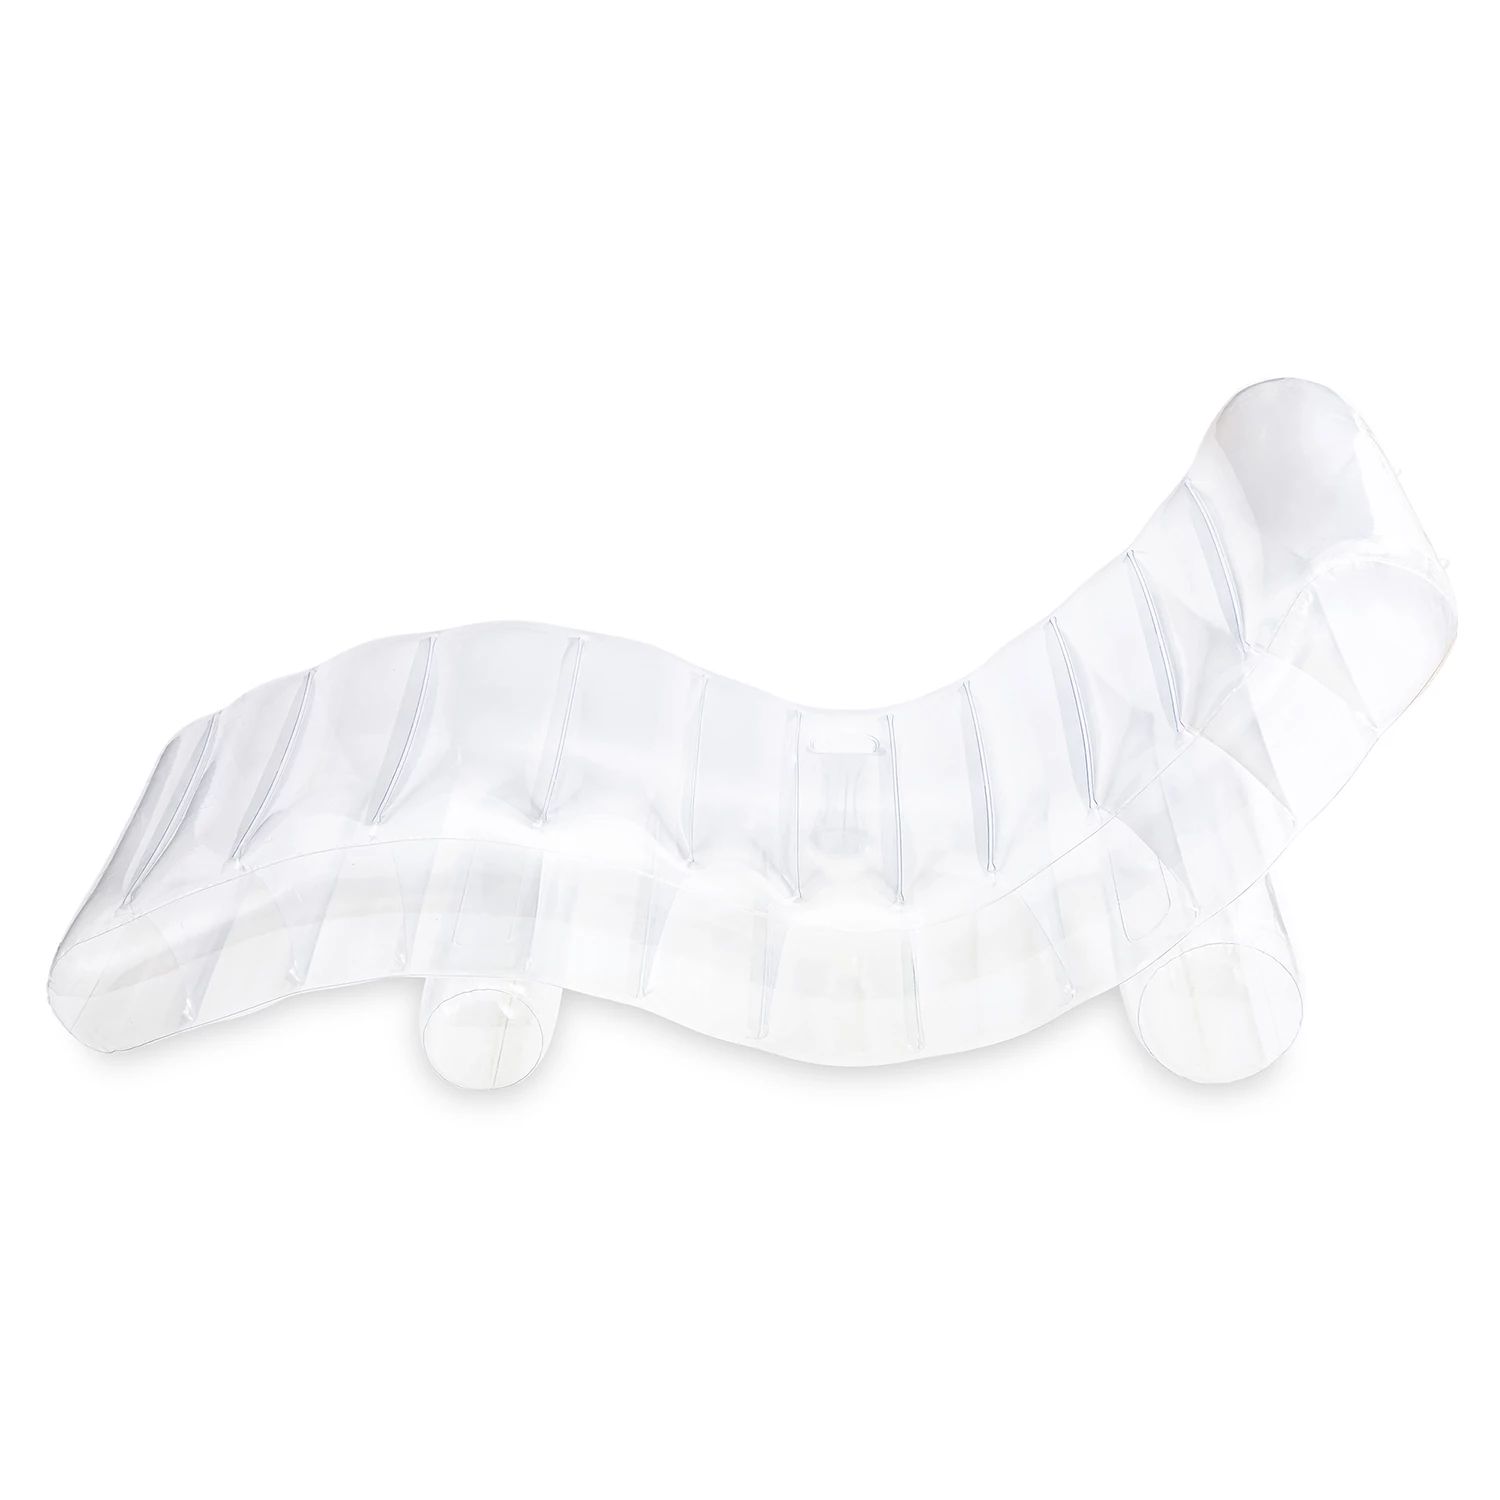 Member’s Mark 5.6 Ft. Calm Clear Chaise Lounger Pool Float | Sam's Club